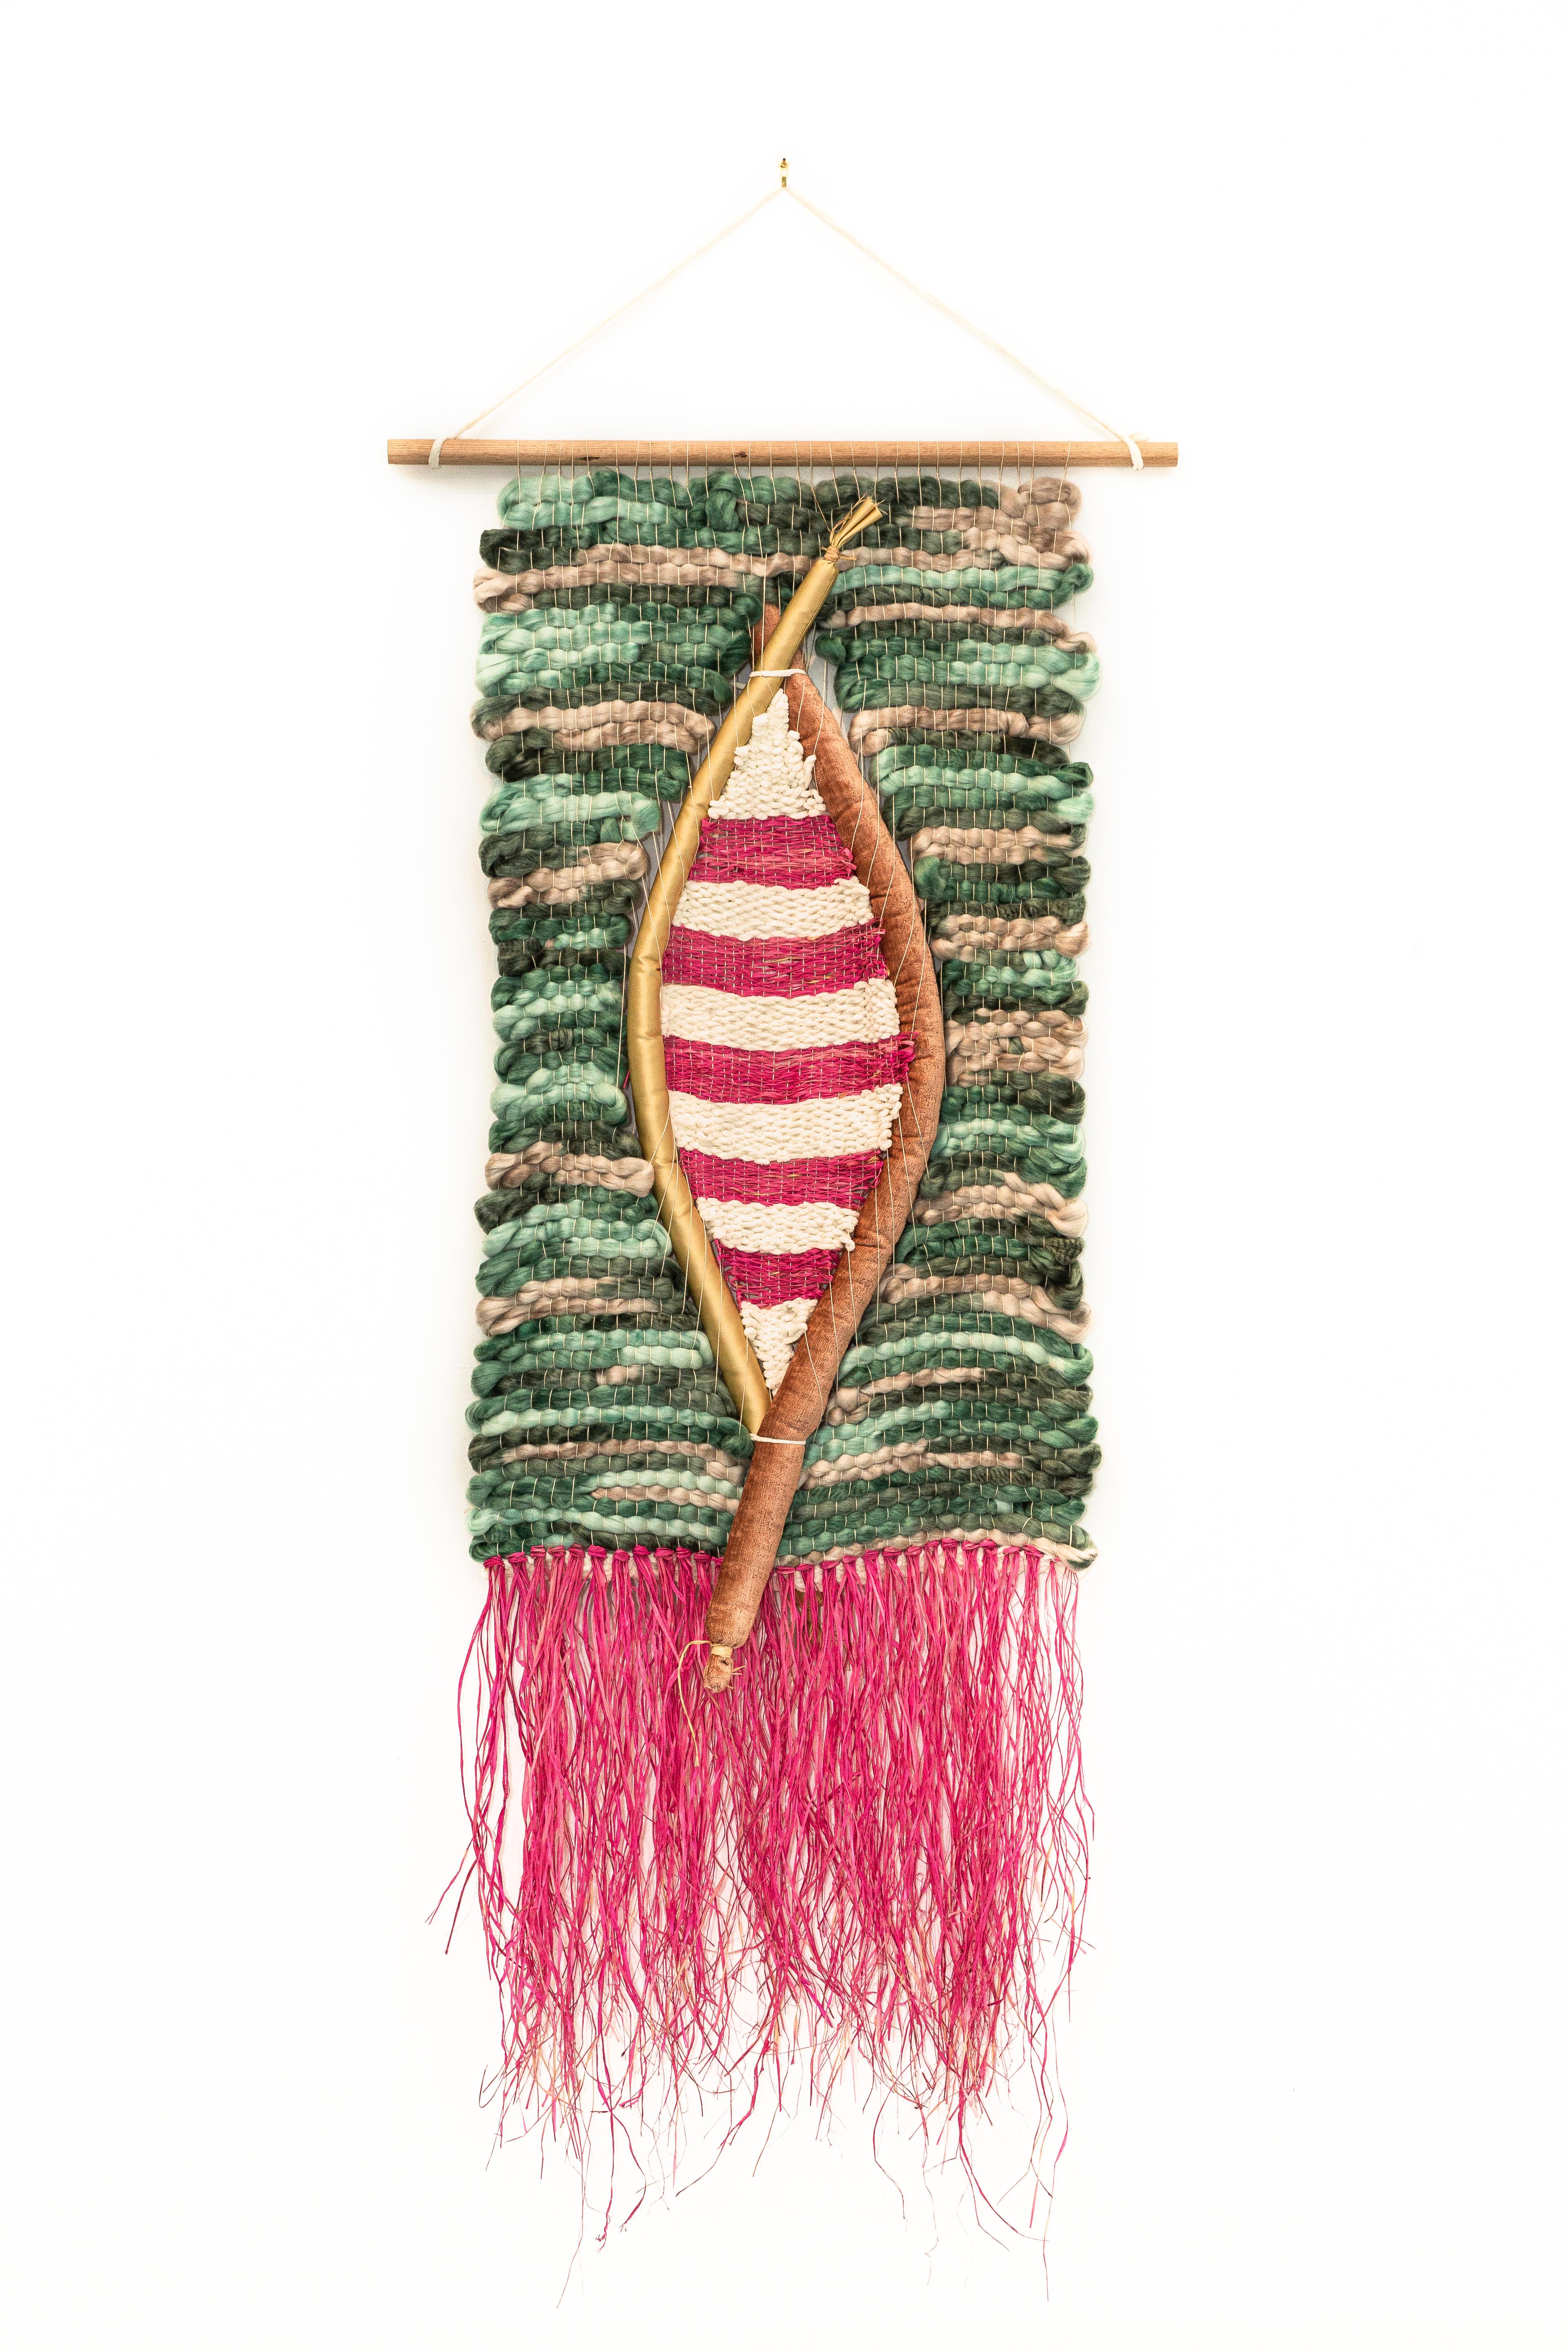 Tubes 2- Fabric, Yarn, Woven Wall Hanging, Sculpture, Green, Pink, Yellow - Mixed Media Art by Pam Marlene Taylor